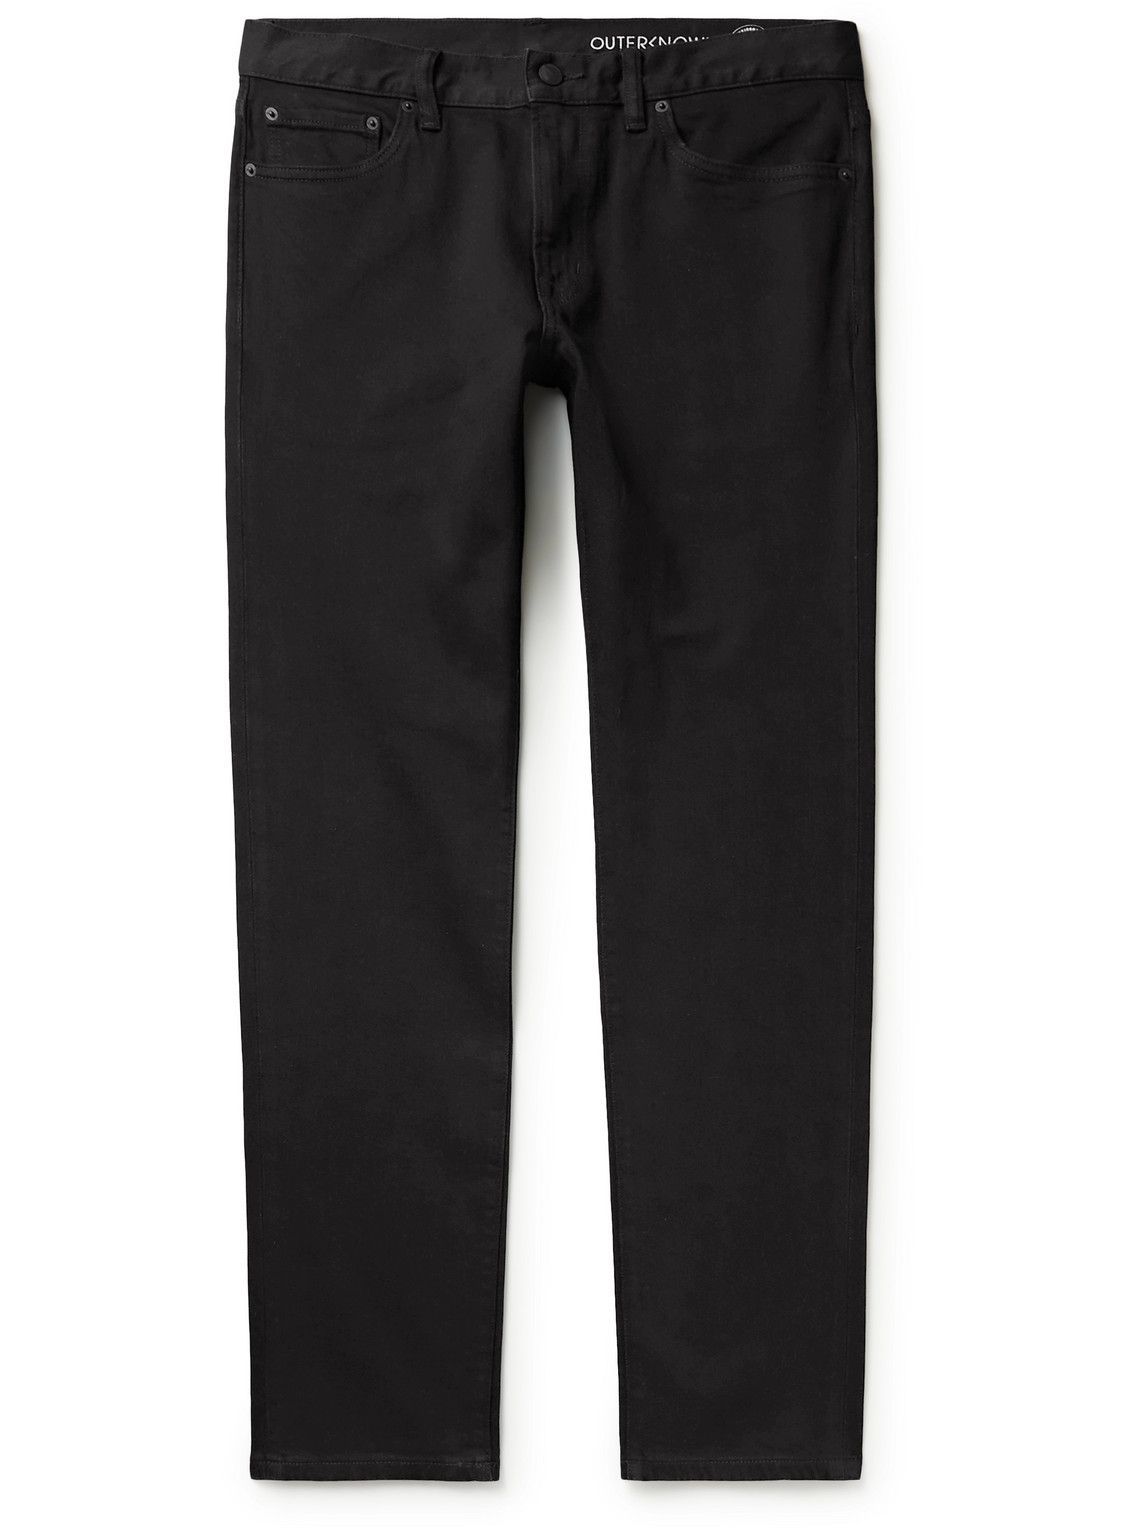 Outerknown - Ambassador Slim-Fit Organic Jeans - Black Outerknown